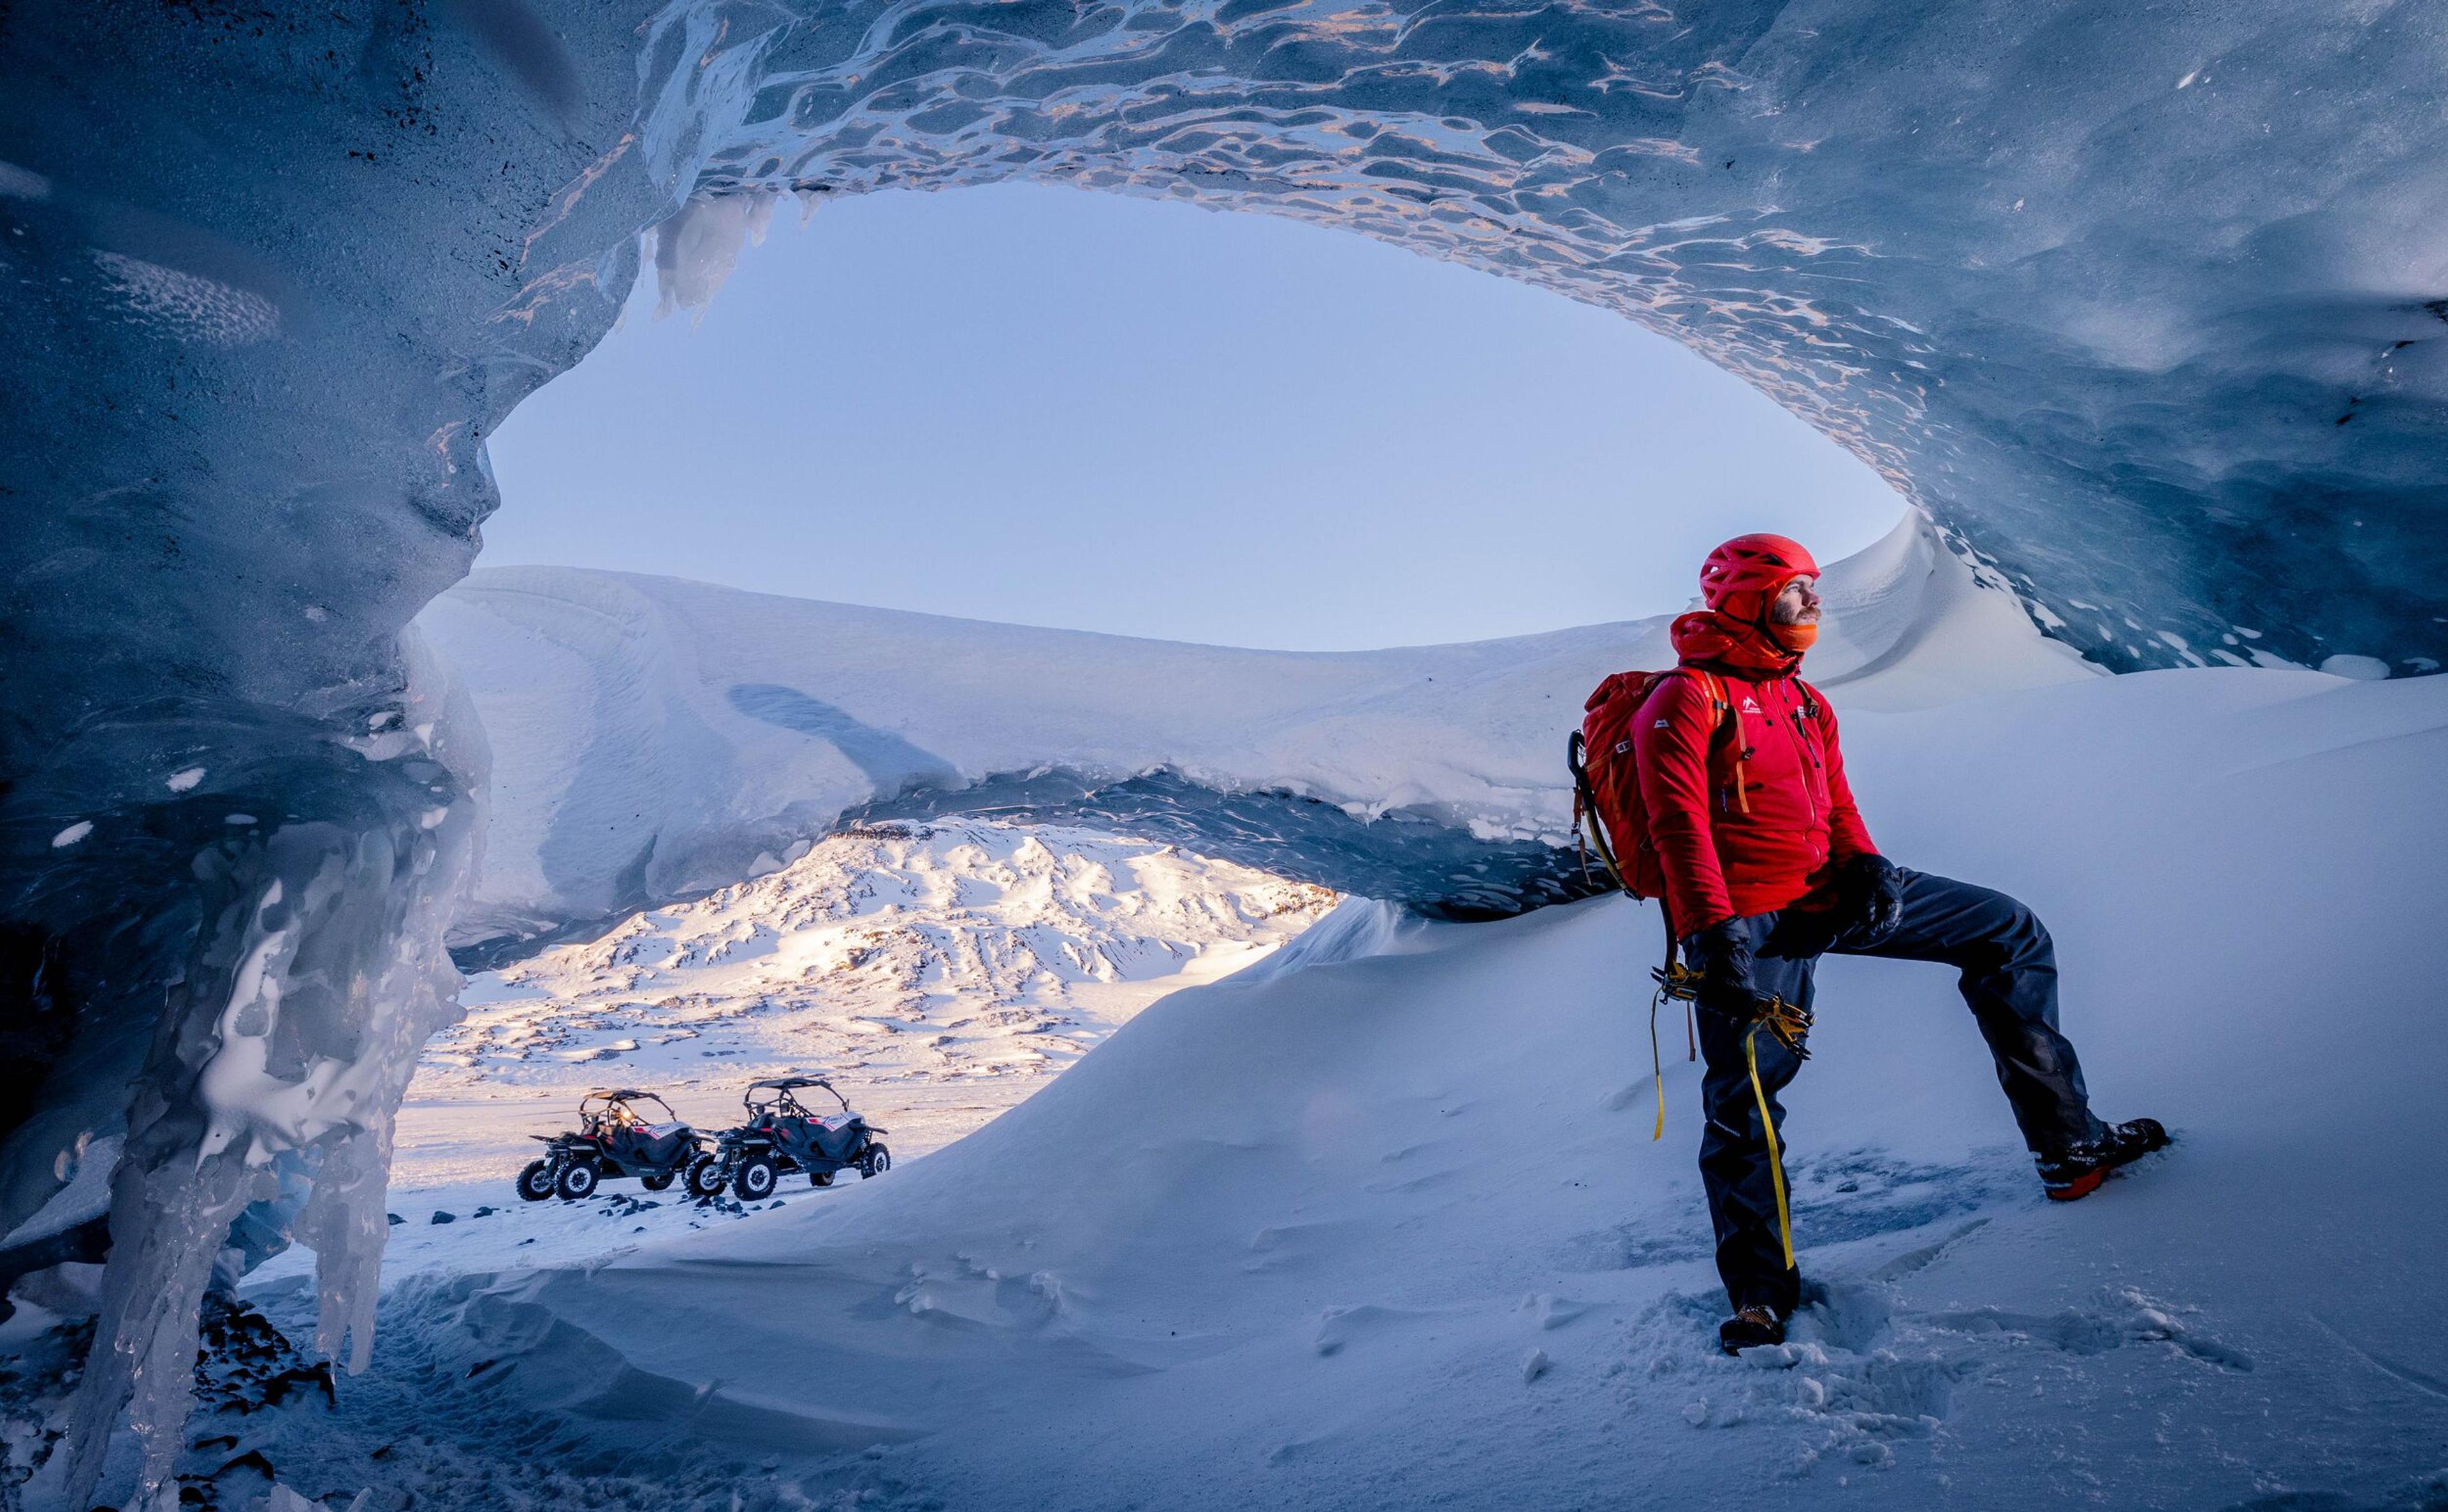 A person dressed in red winter gear stands inside the Askur Ice Cave, framed by ice formations with a clear view of snow-covered mountains and buggies in the background.